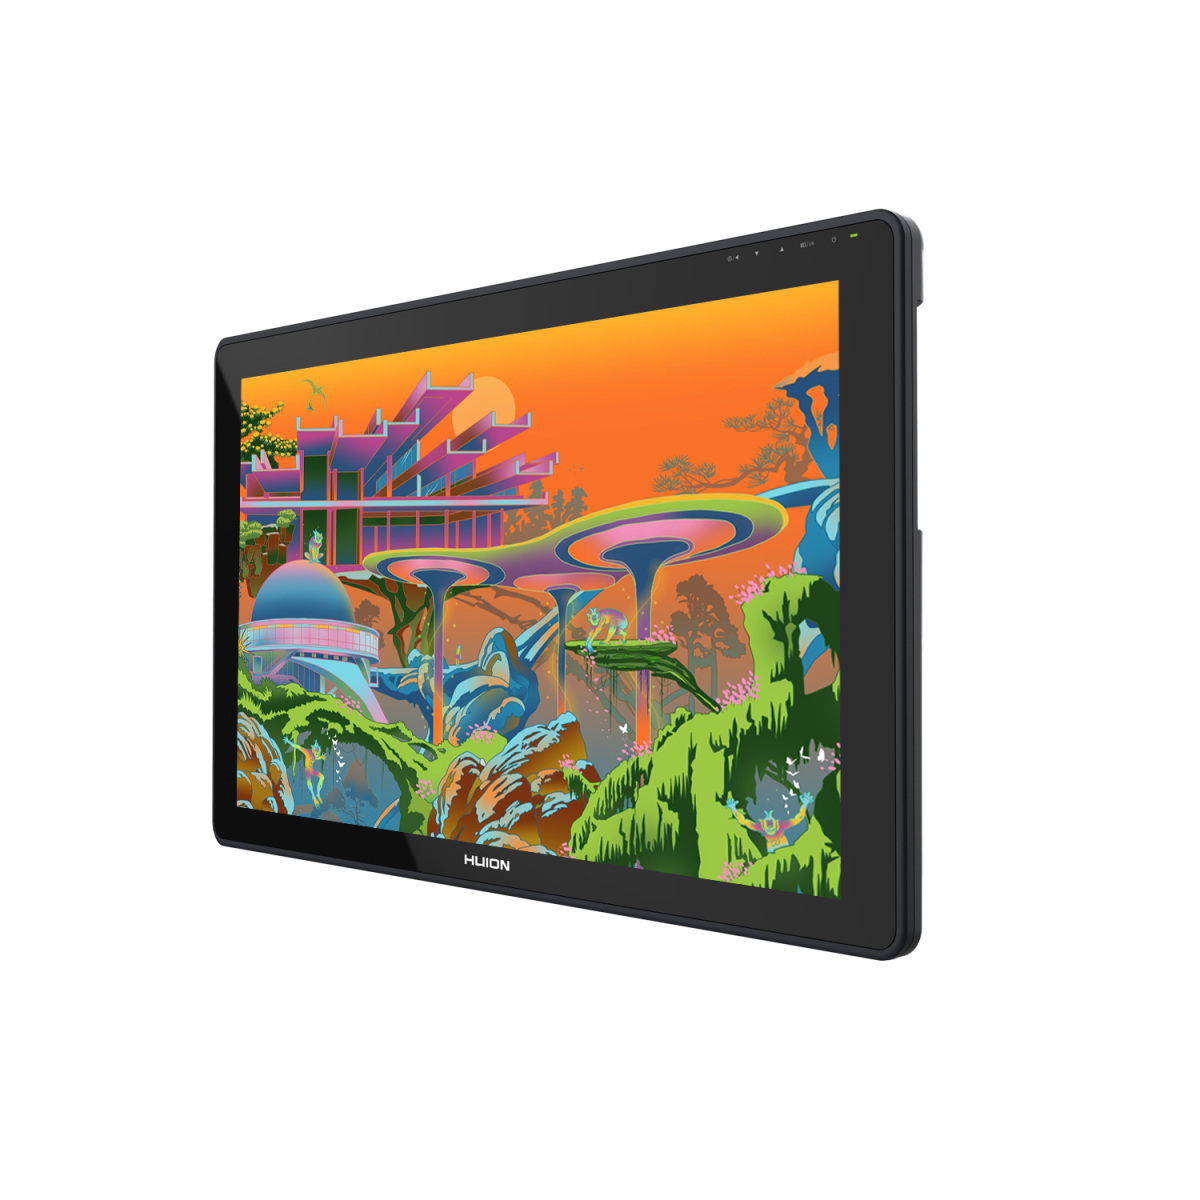 Kamvas 22 | Kamvas 22 Plus Drawing Monitor for Artists | Huion Official Store: Drawing Pen Tablets, Pen Display, Led Light Pad